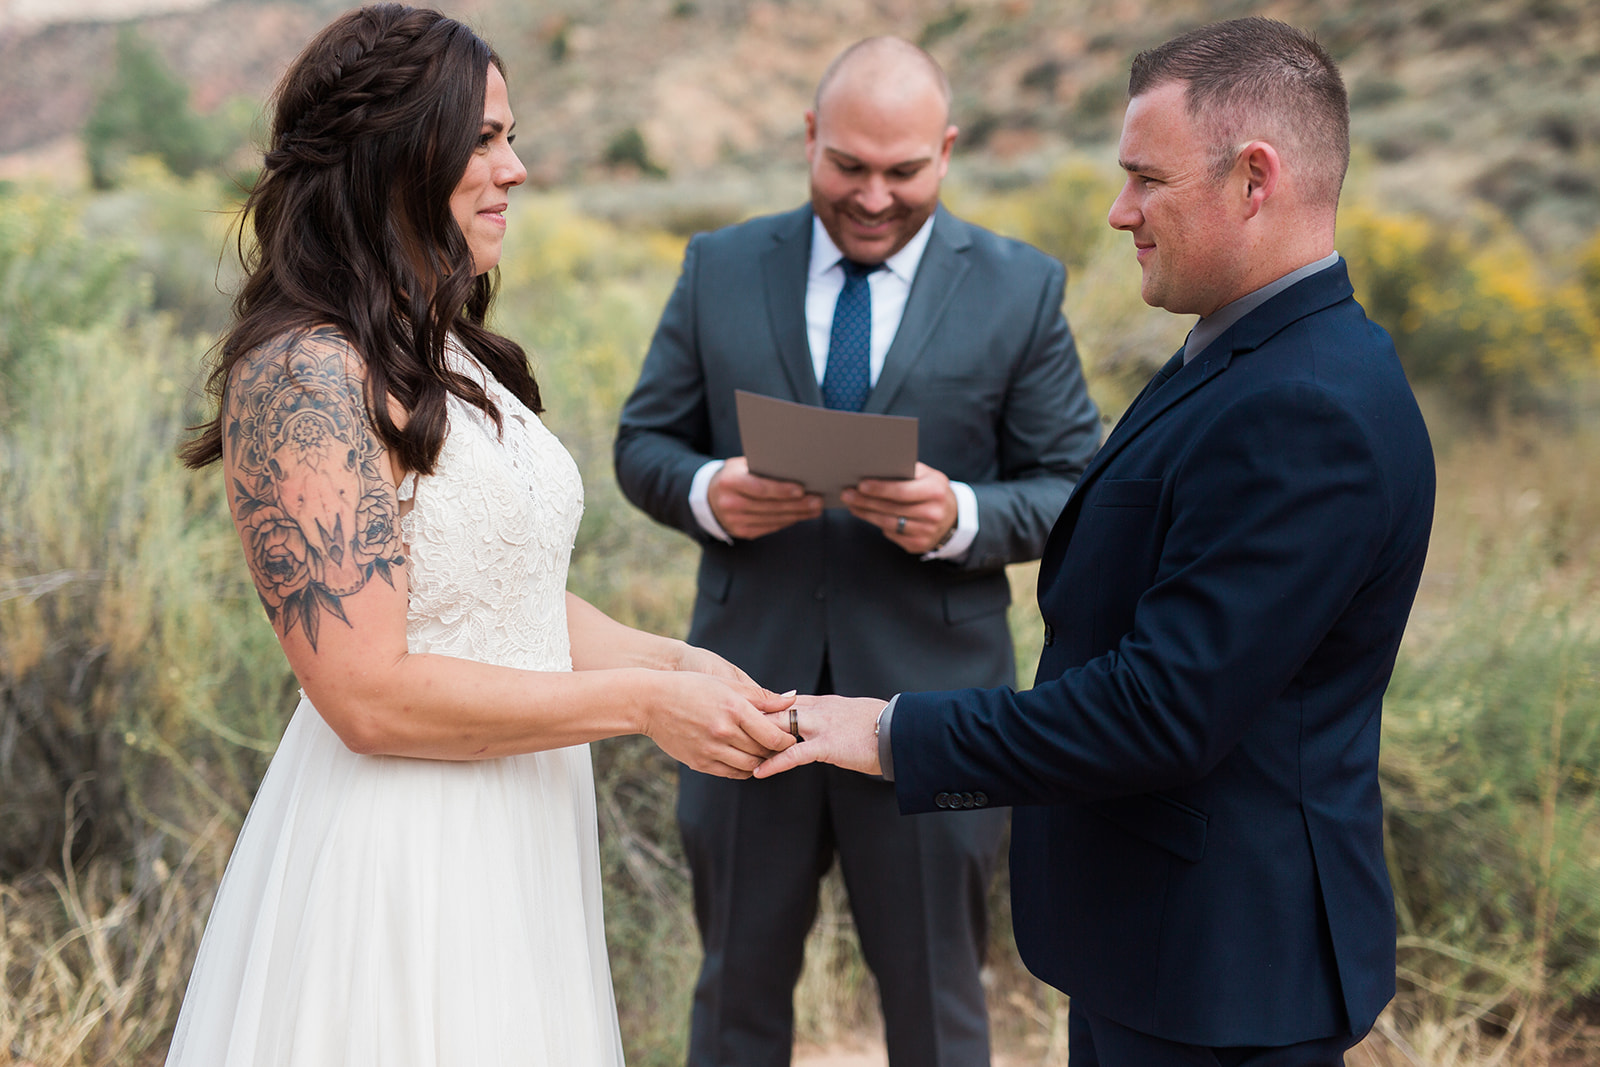 bride puts ring on groom at elopement ceremony